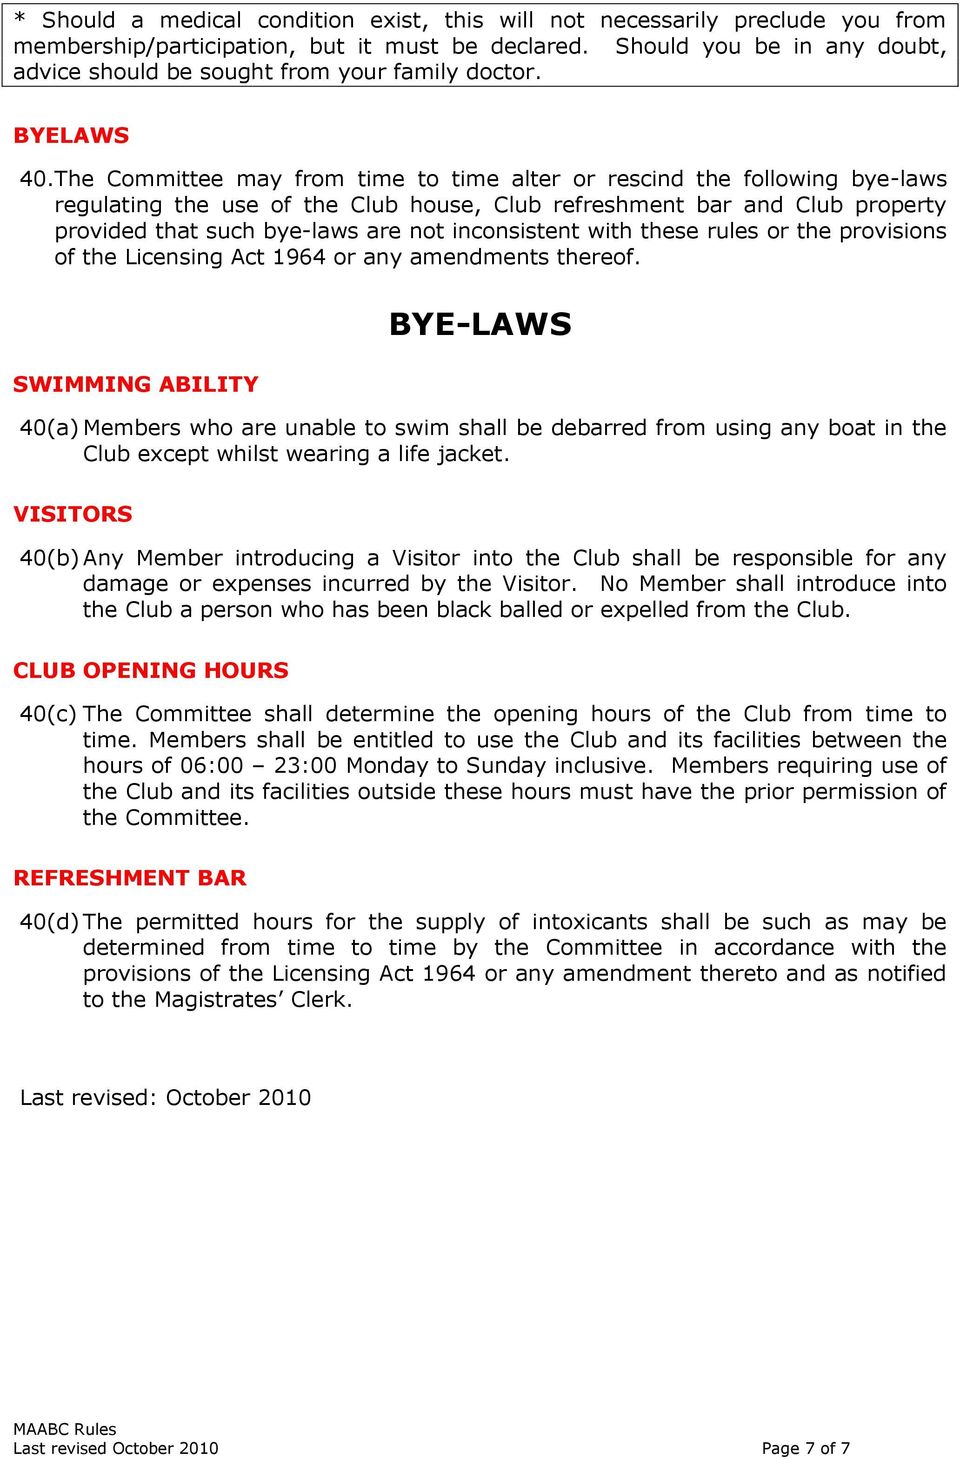 The Committee may from time to time alter or rescind the following bye-laws regulating the use of the Club house, Club refreshment bar and Club property provided that such bye-laws are not